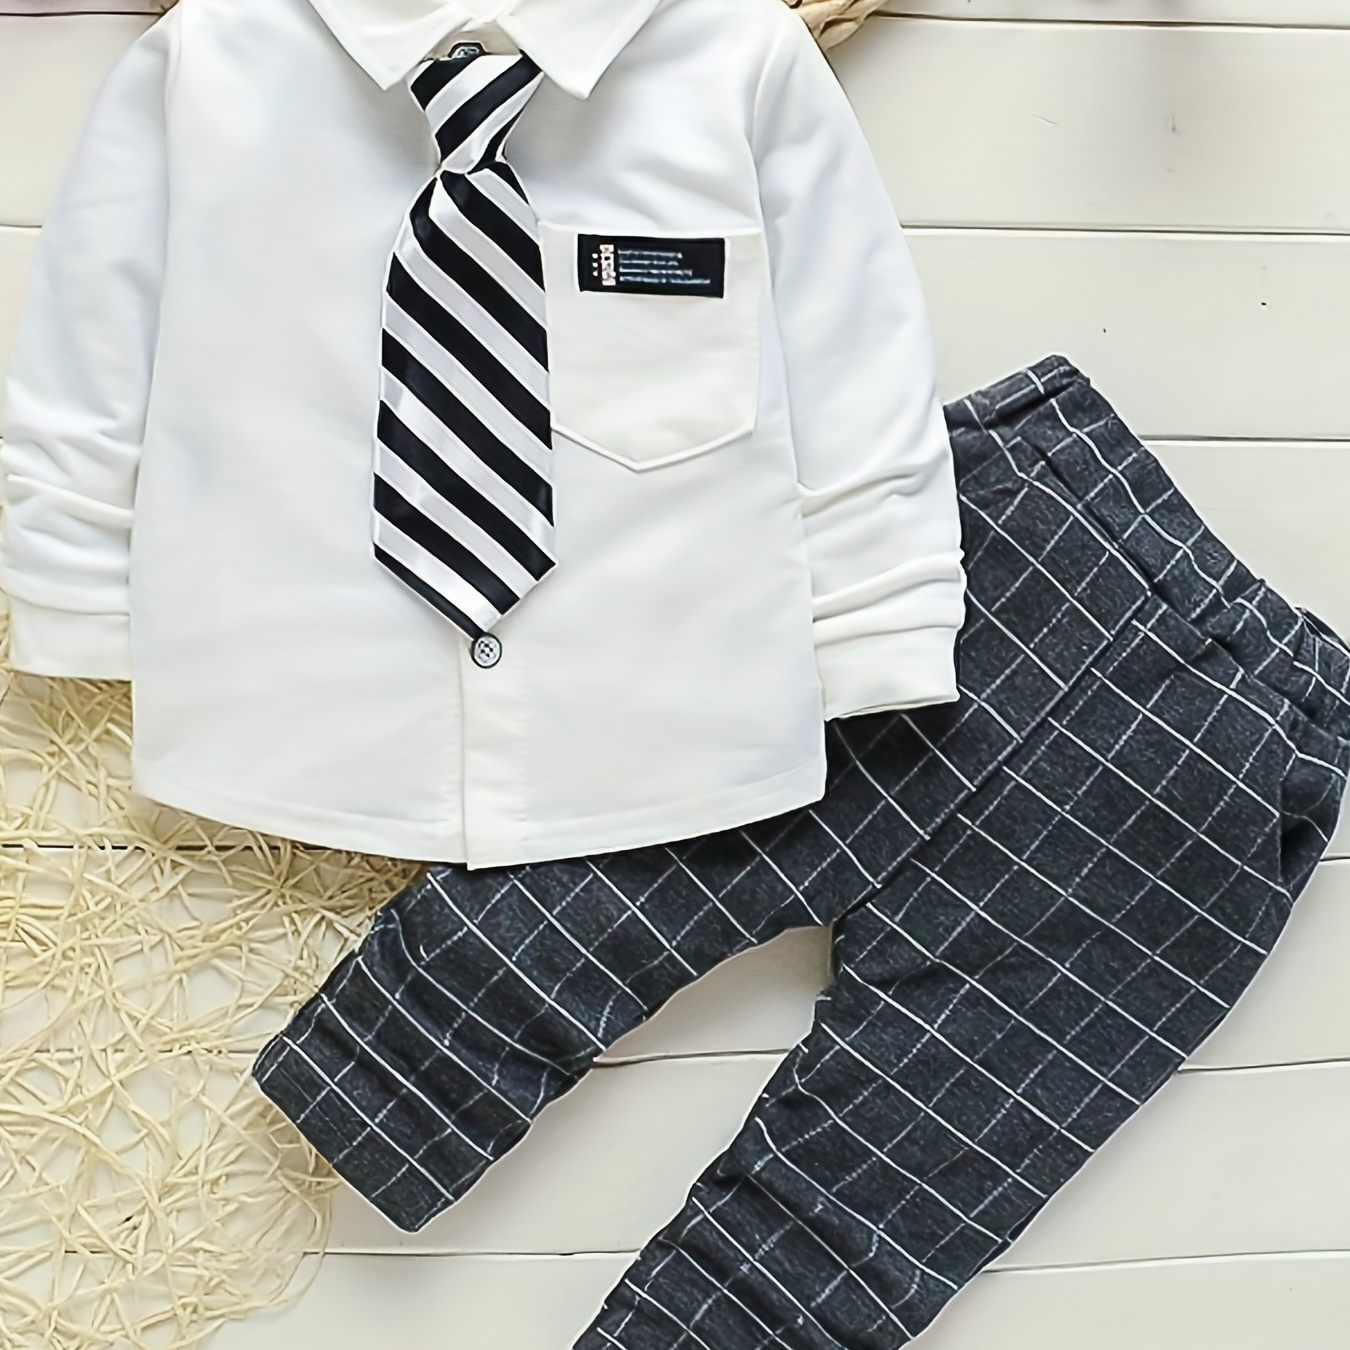 

Boys Cute Gentleman Shirt Suit - Button Lapel Long Sleeve Shirt + Tie + Plaid Pants Set, Perfect For Toddlers Babies Party Birthday Dress Up